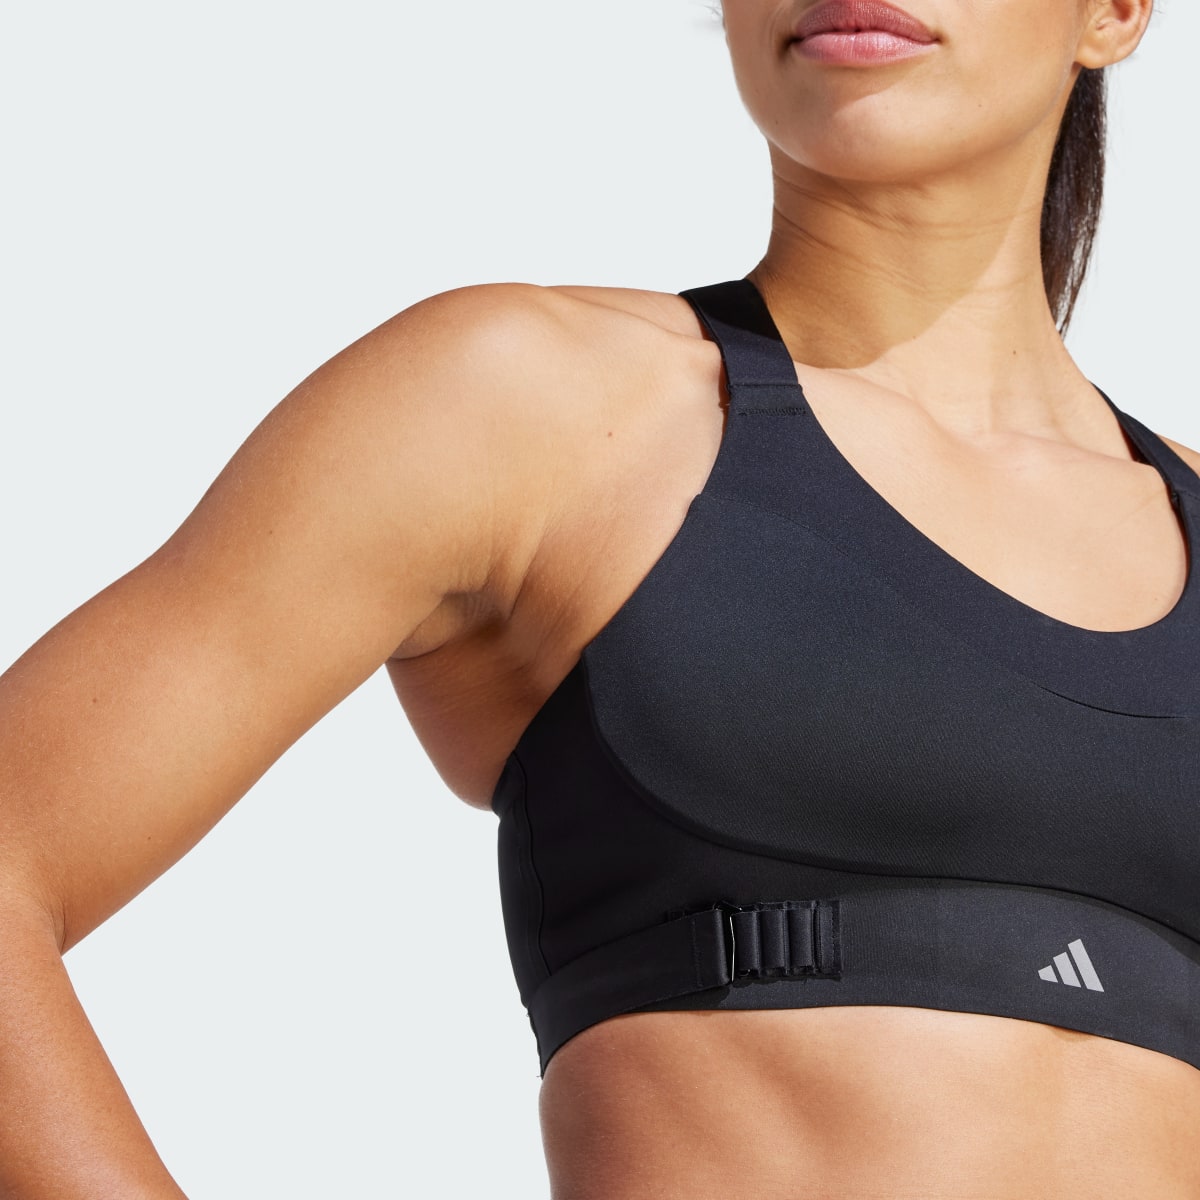 Adidas Brassière Collective Power Fastimpact Luxe Maintien fort. 7